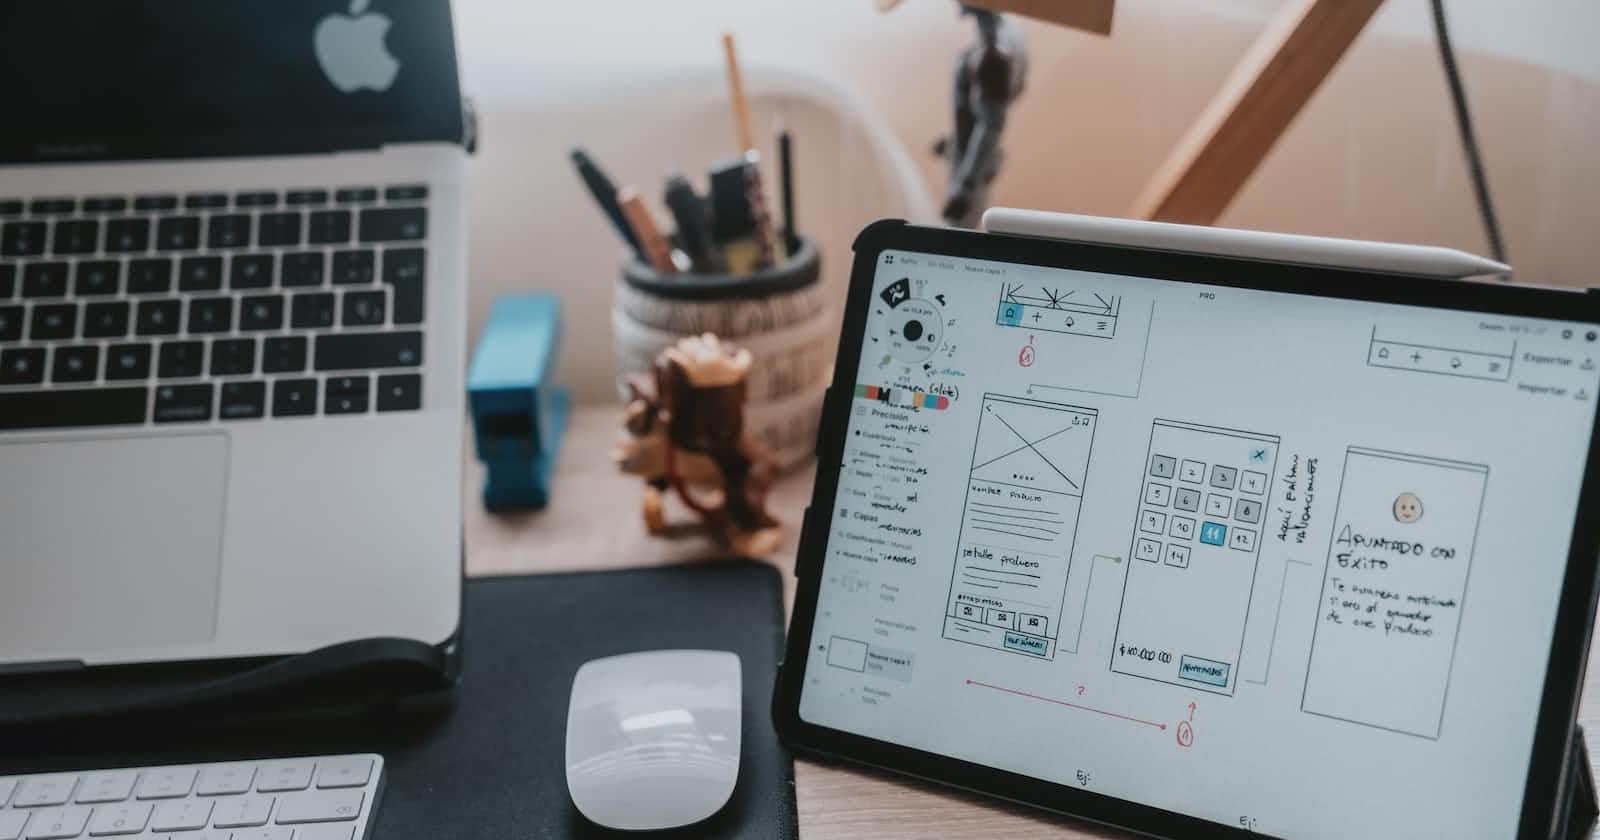 An Introduction Into The World of UI/UX Design